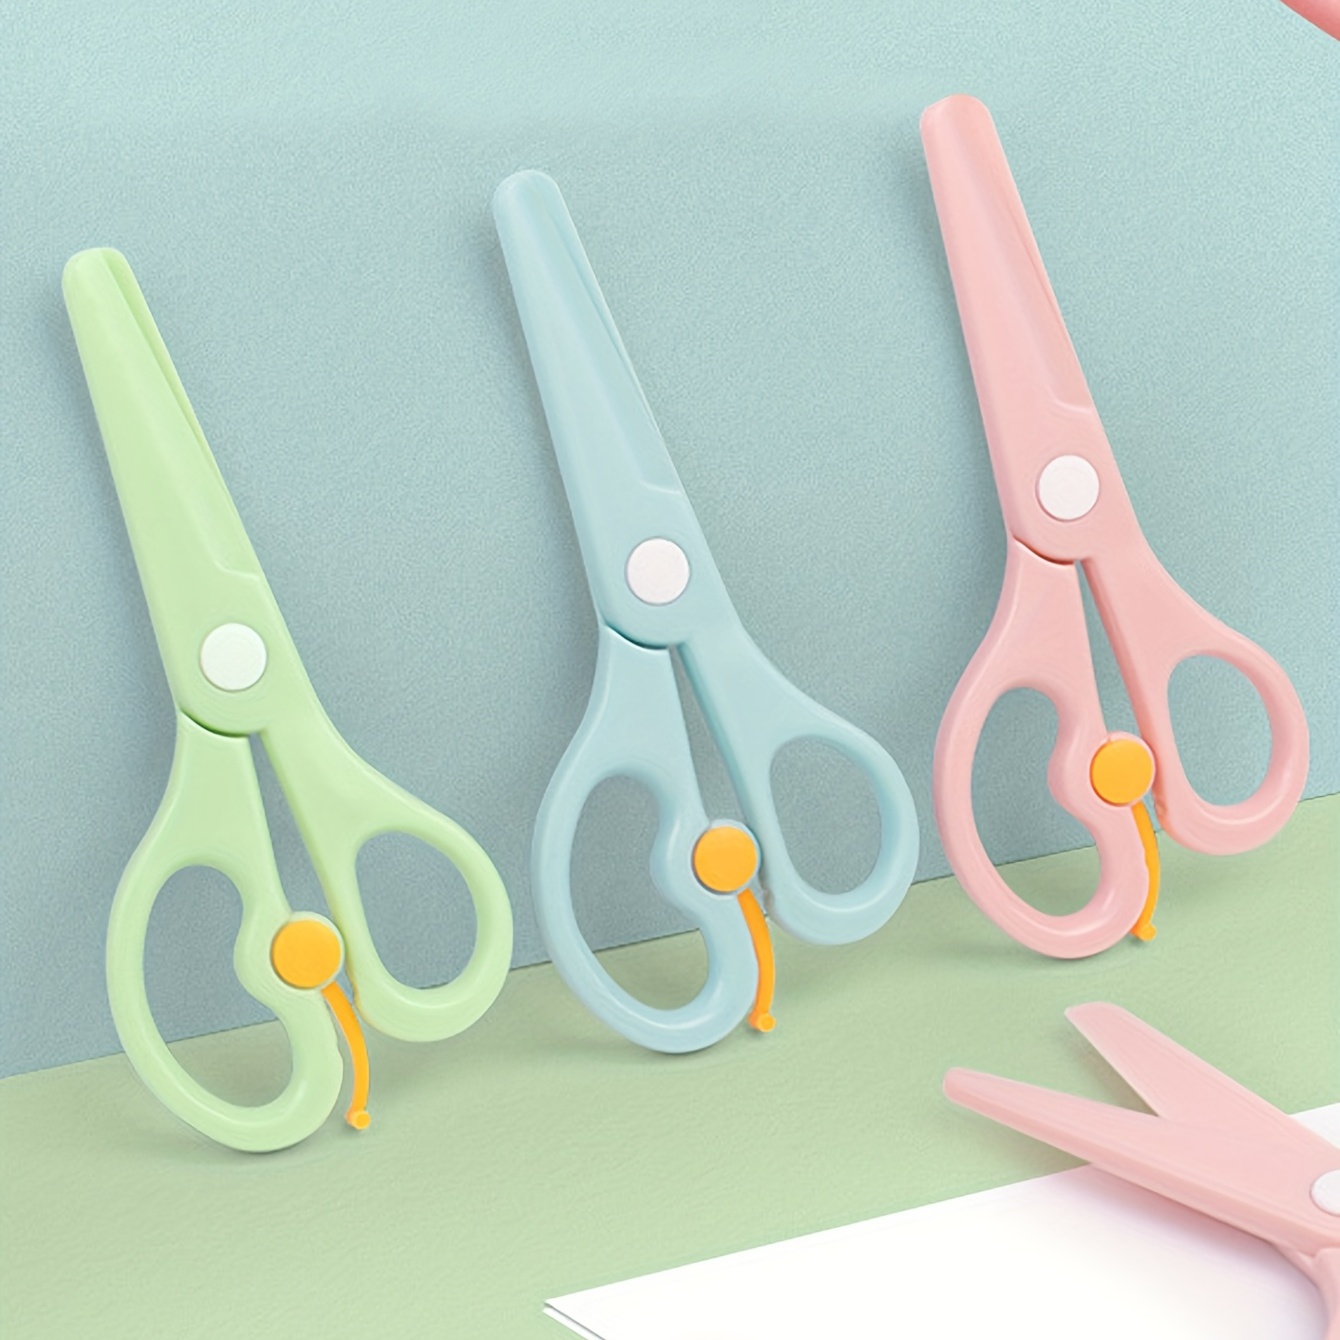 4pcs Safety Kids Scissors Toddler Preschool Blunt Tip Scissors With Cover  For School Classroom Crafting Cut Paper Assorted Colors 5.5 Inches, School S